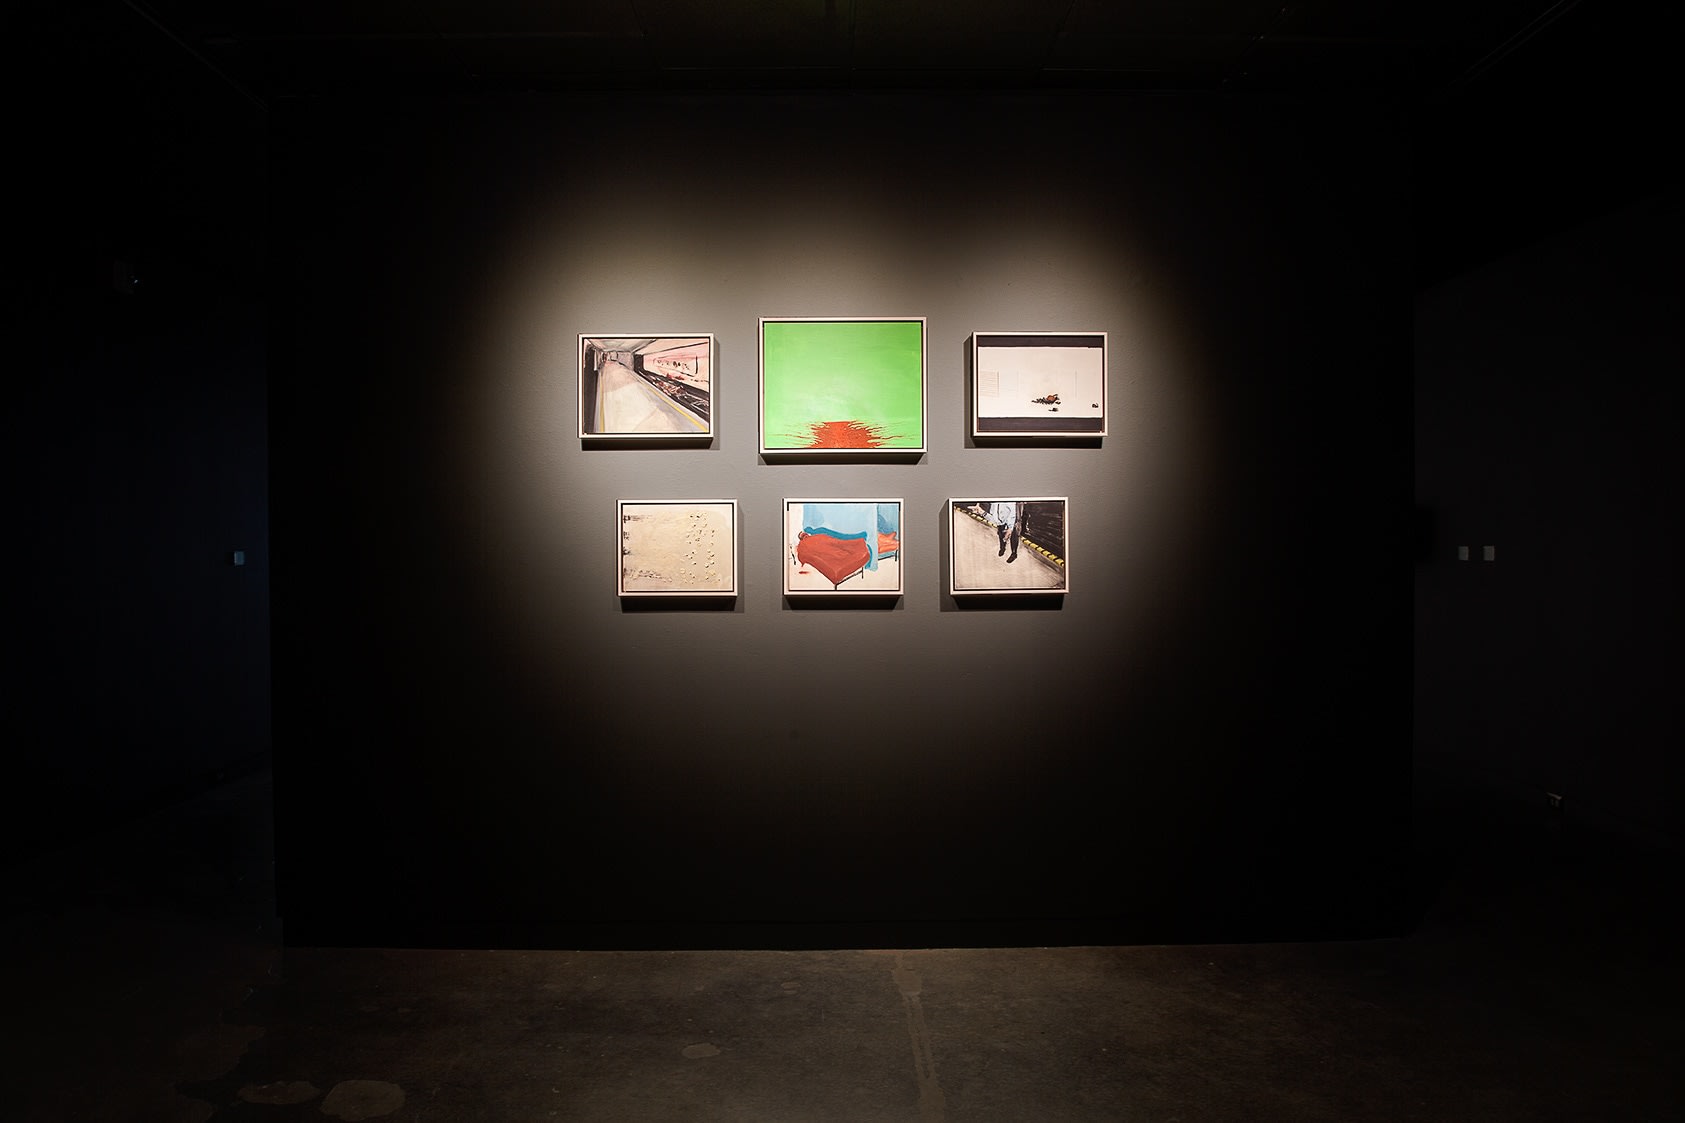 Installation view: Catherine Doctorow Prize for Contemporary Painting: Tala Madani, Utah Museum of Contemporary Art, 2013